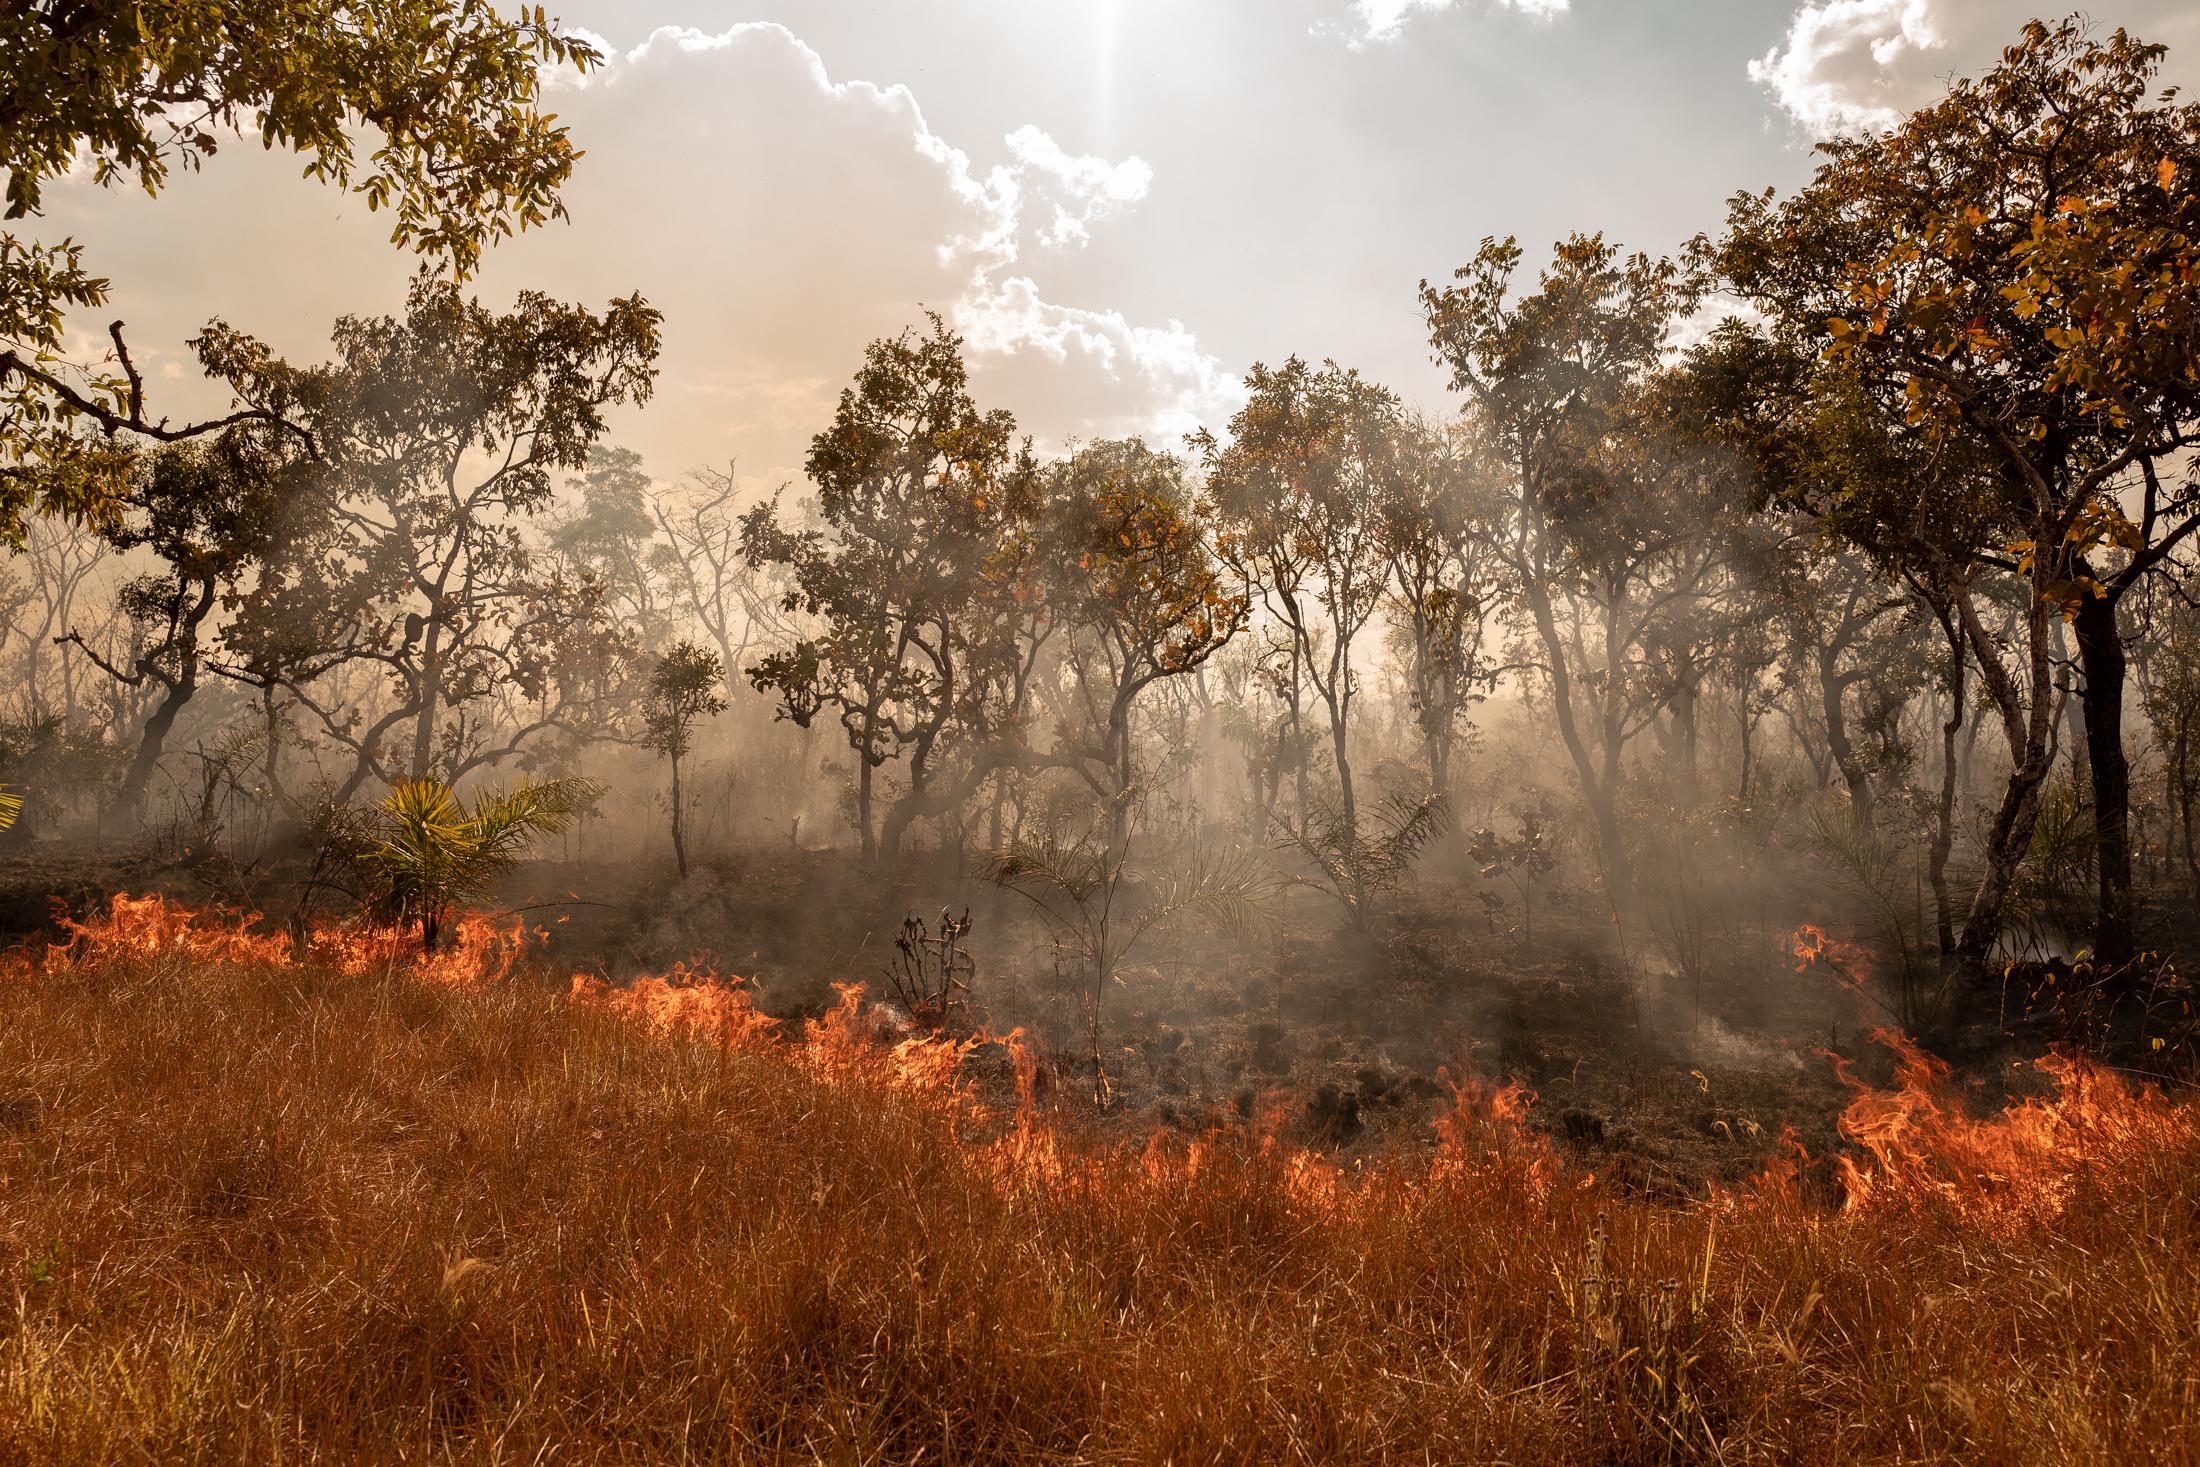  In the Cerrado biome (the second largest in South America) forest fires are common because of...